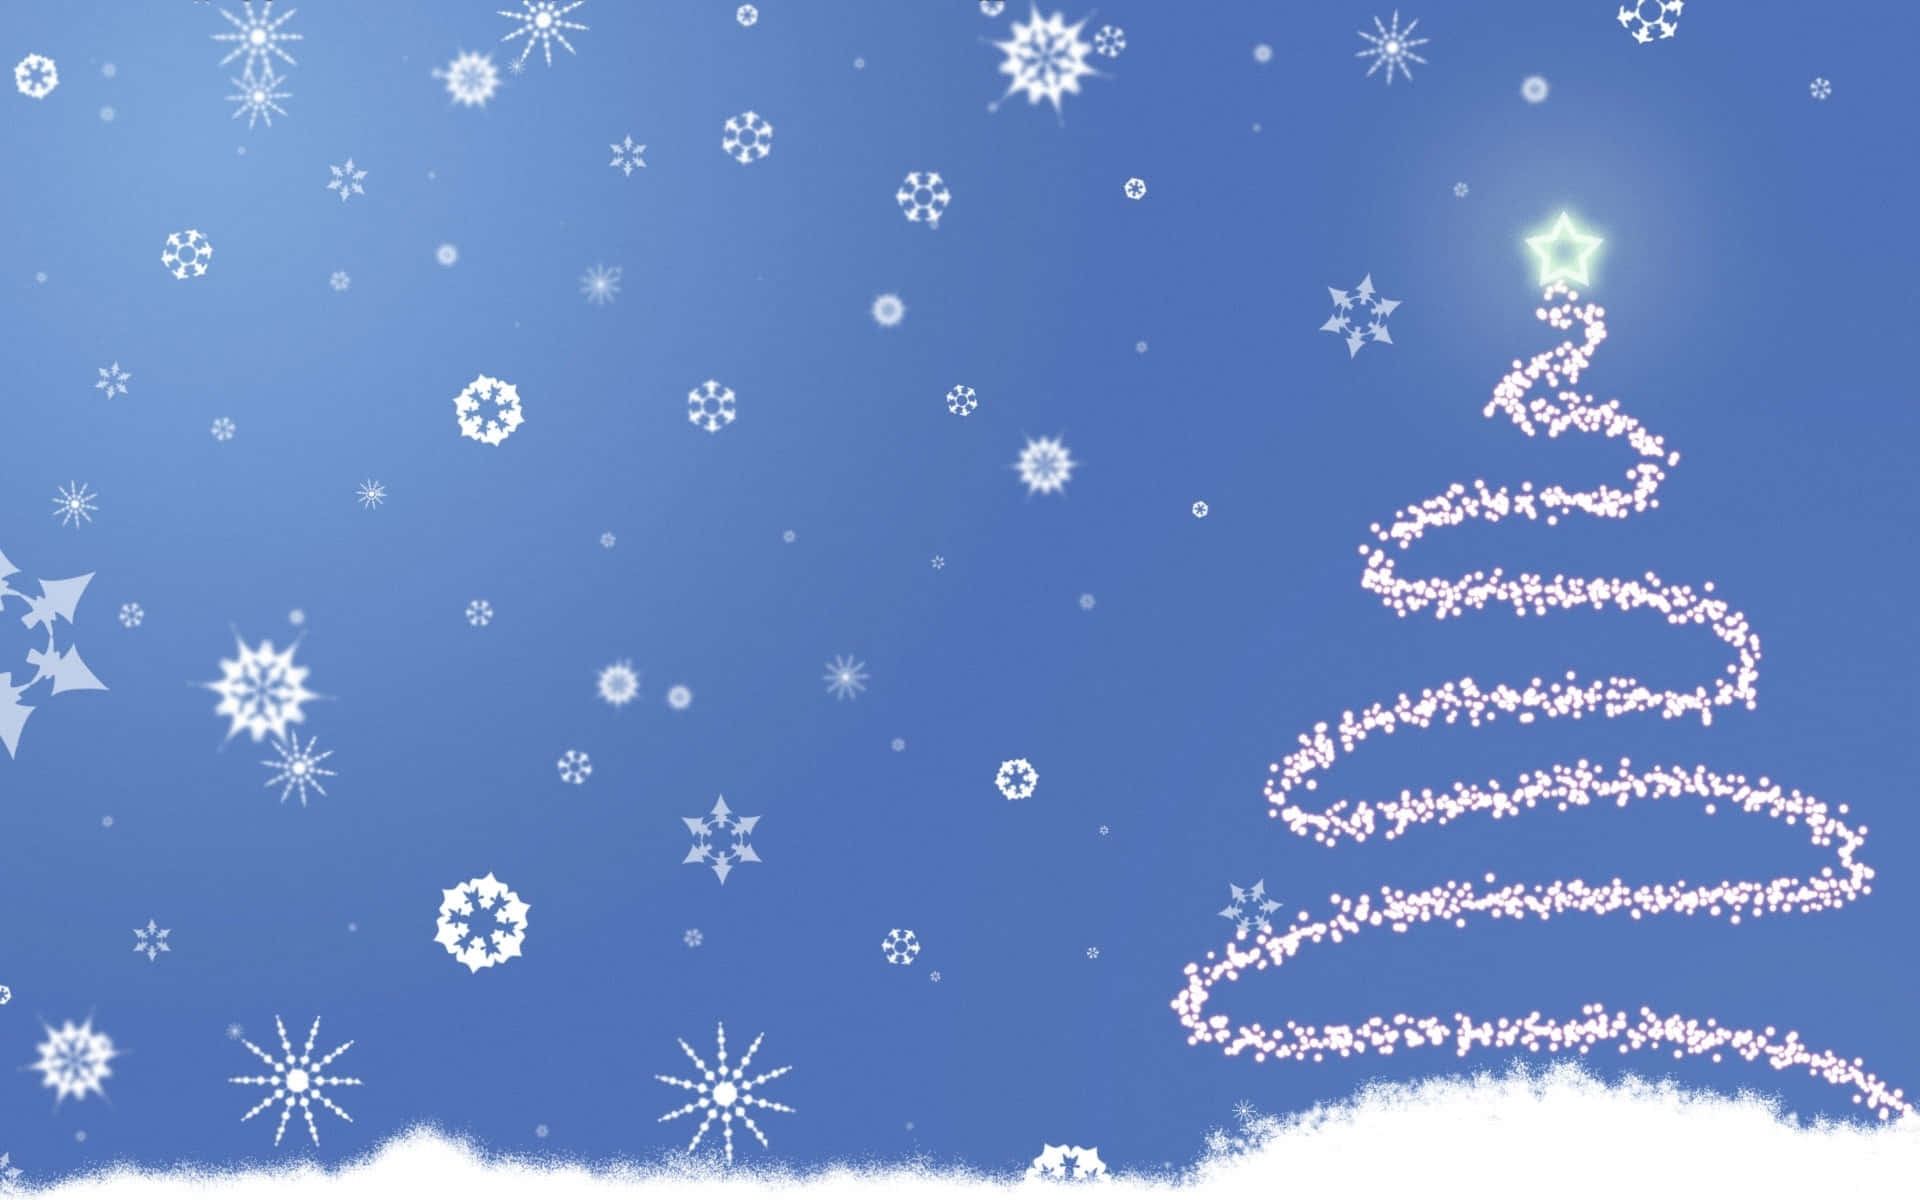 Free Christmas Background Wallpaper